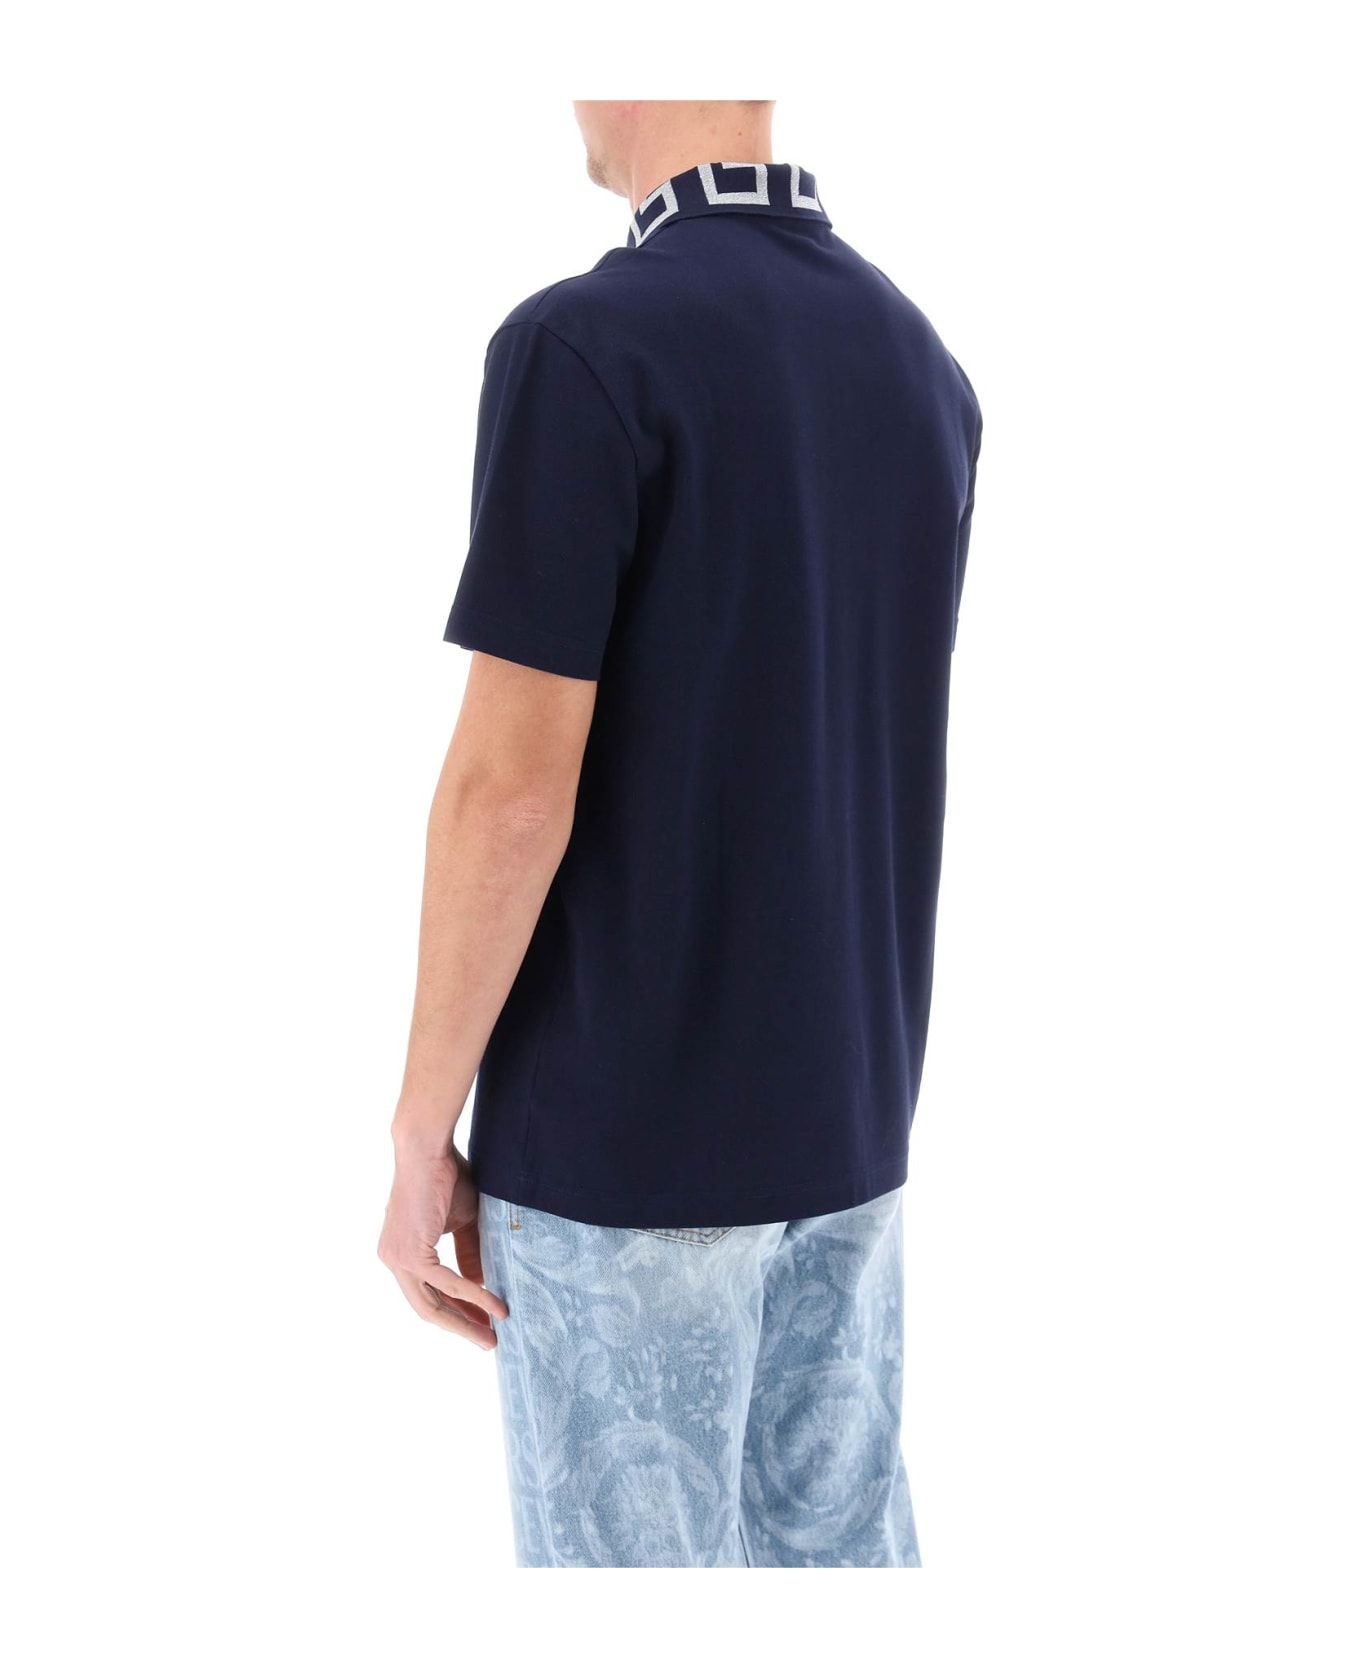 Versace Polo Shirt In Blue Cotton - Navy blue